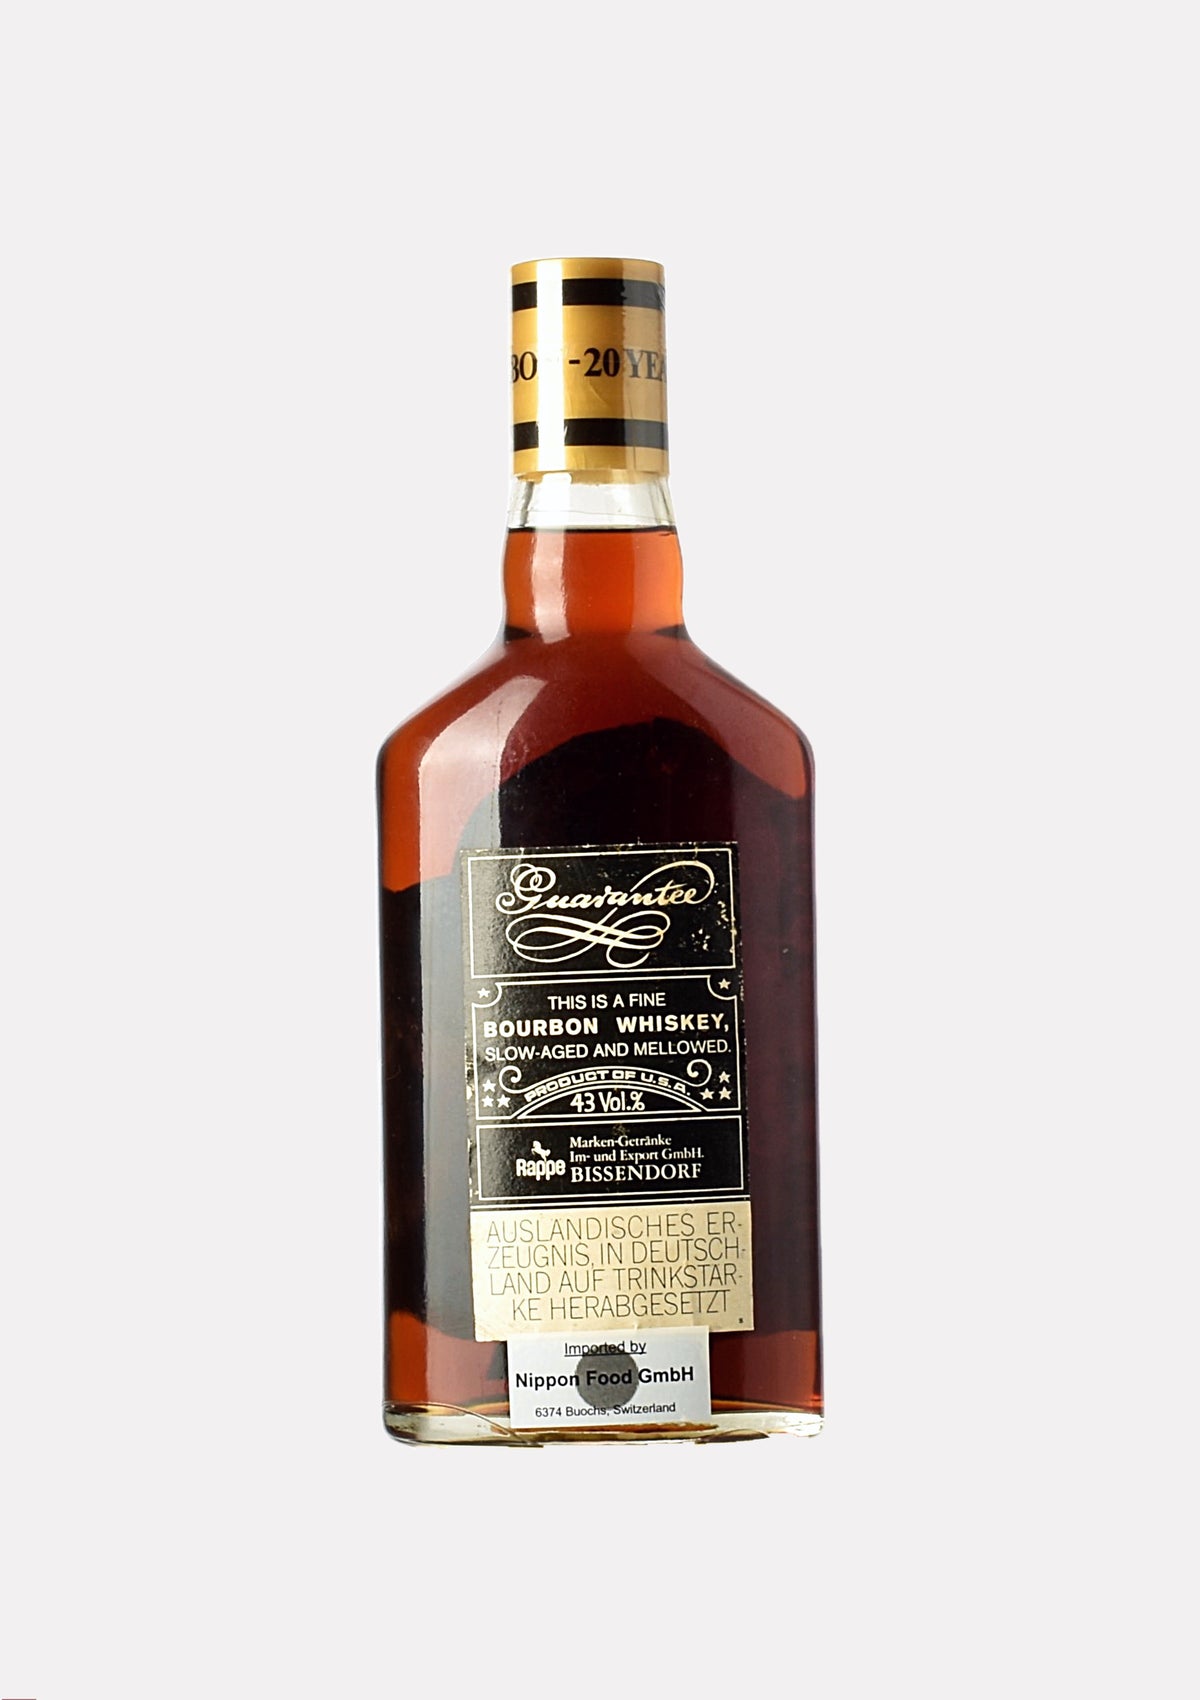 Longtrail Straight Bourbon Whiskey 20 Jahre